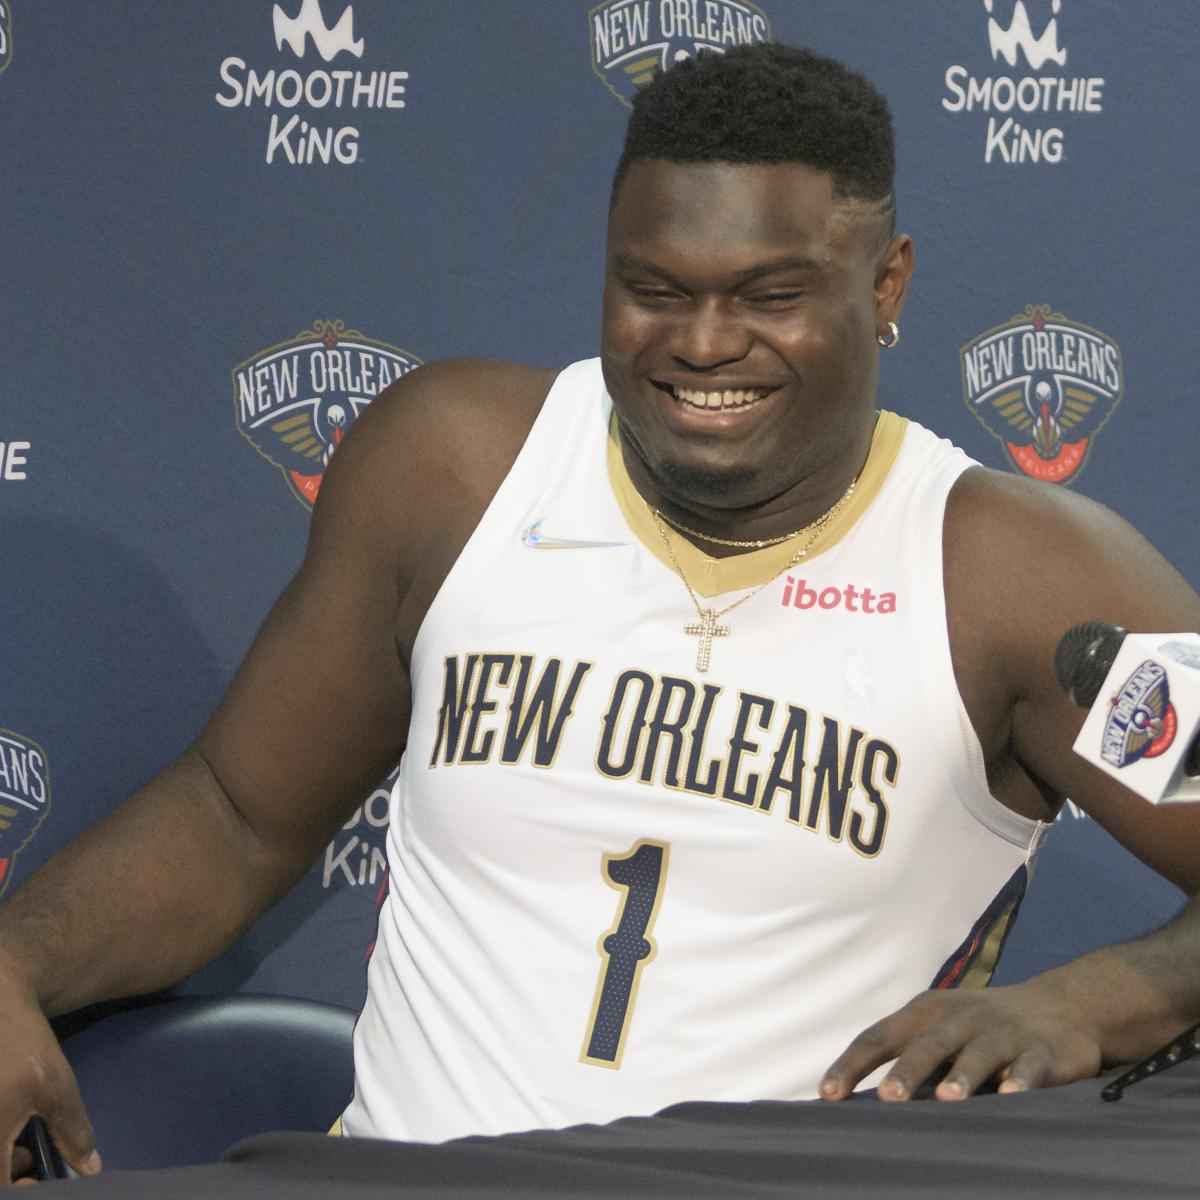 New Orleans Pelicans: Zion Williamson will be a rookie all-star